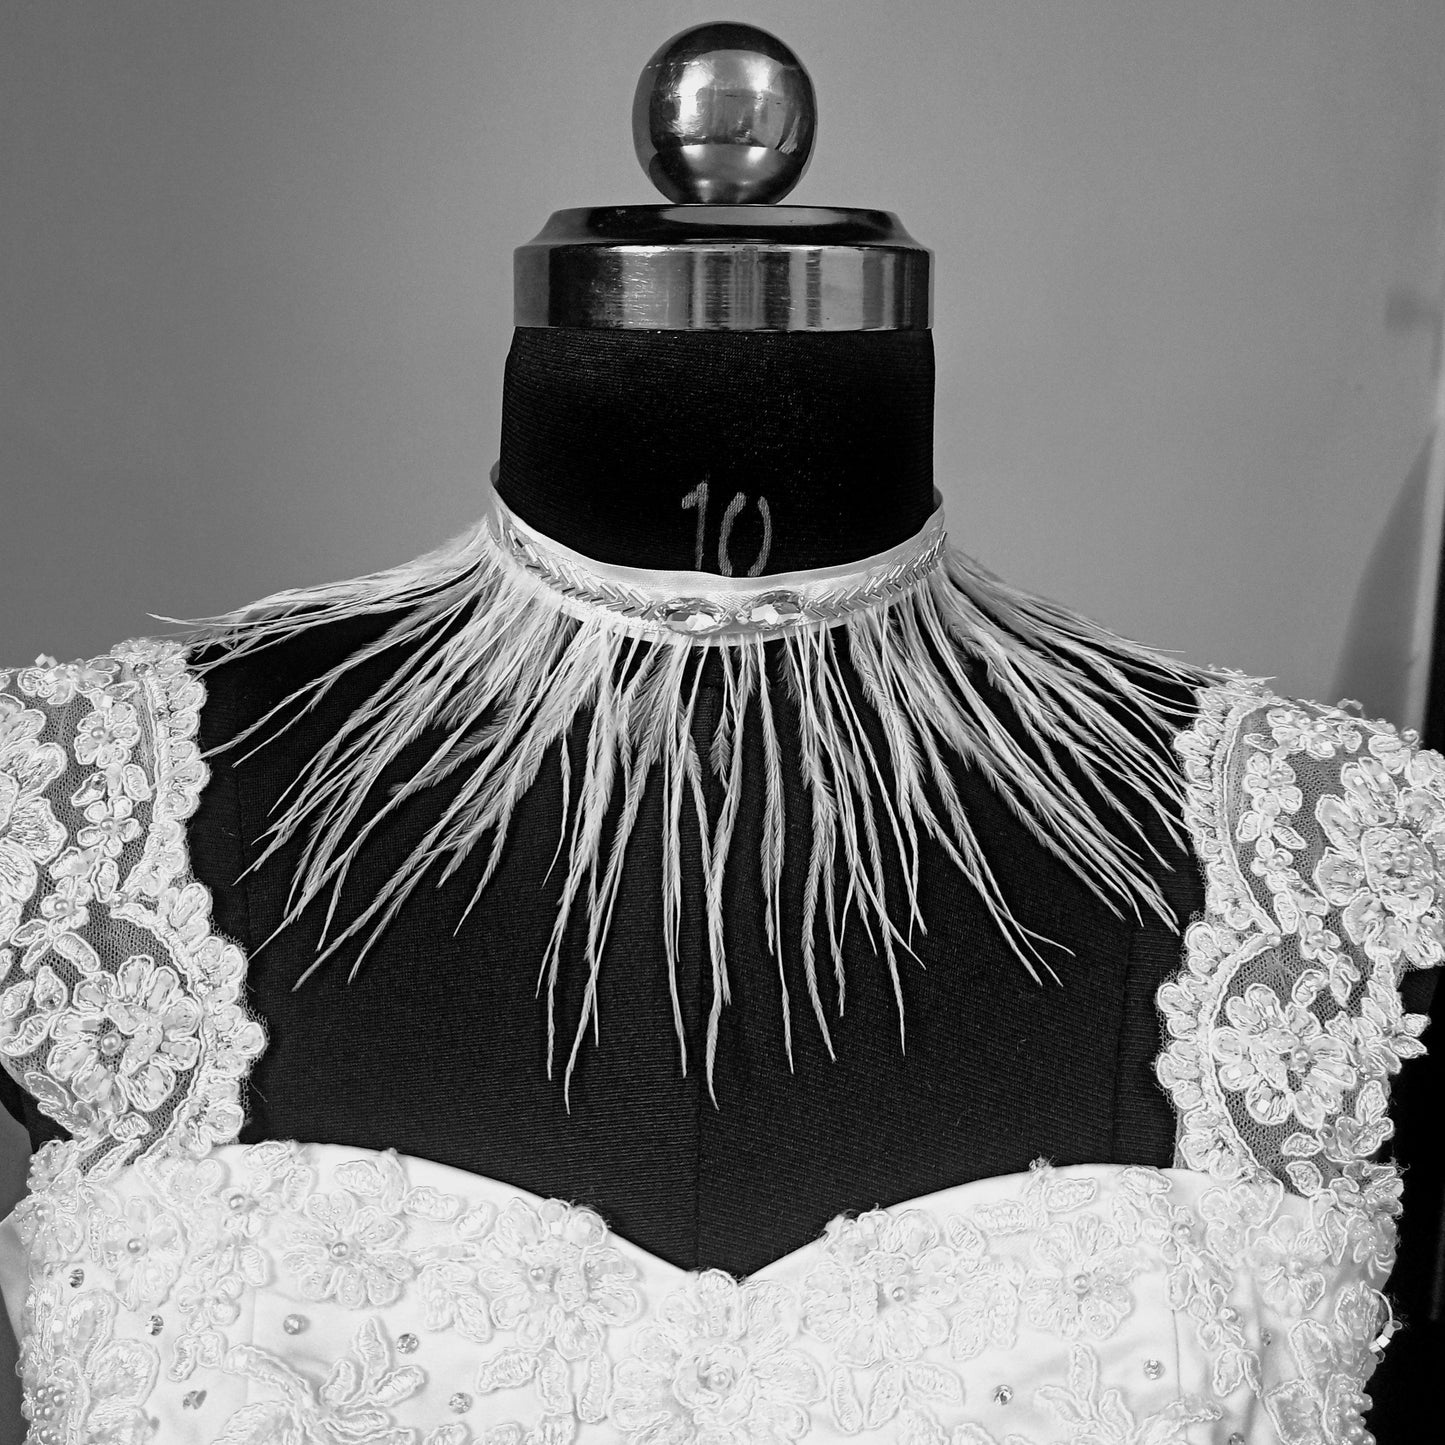 Feather collar necklace festival outfit rhinestone choker black or white